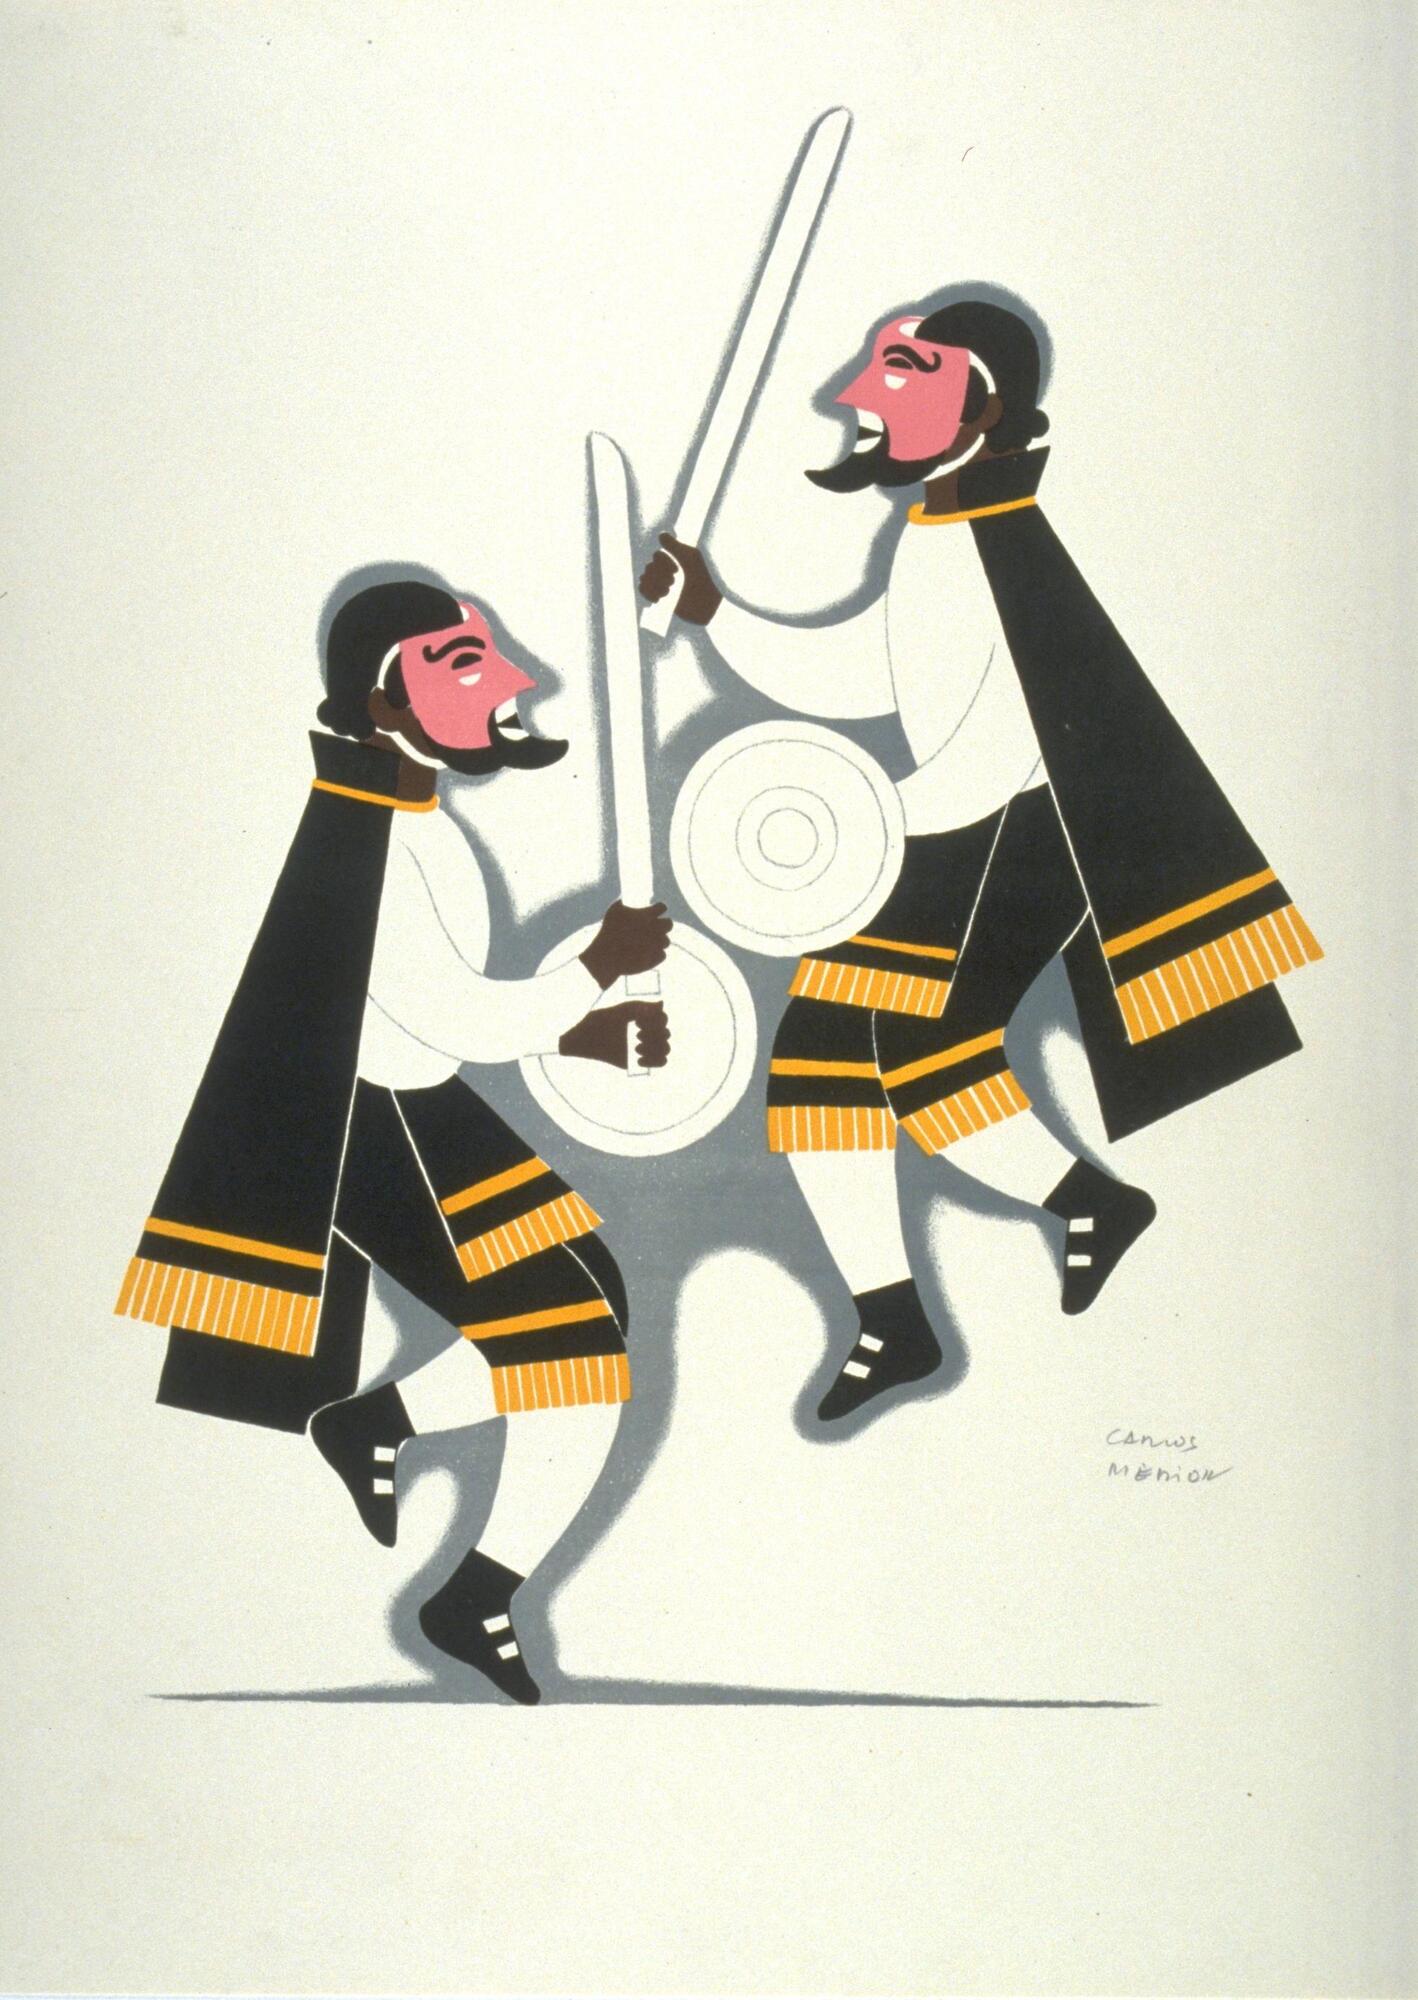 Centered in the page on this print are two dark-skinned figures wearing pink-skinned masks. They are both dressed identically in white shirts and tights, with black boots, matching black knickers, and capes trimmed in gold. Each figure holds a small circular shield in one hand and a sword in the other—both in white. Both seem to be leaping in the air.